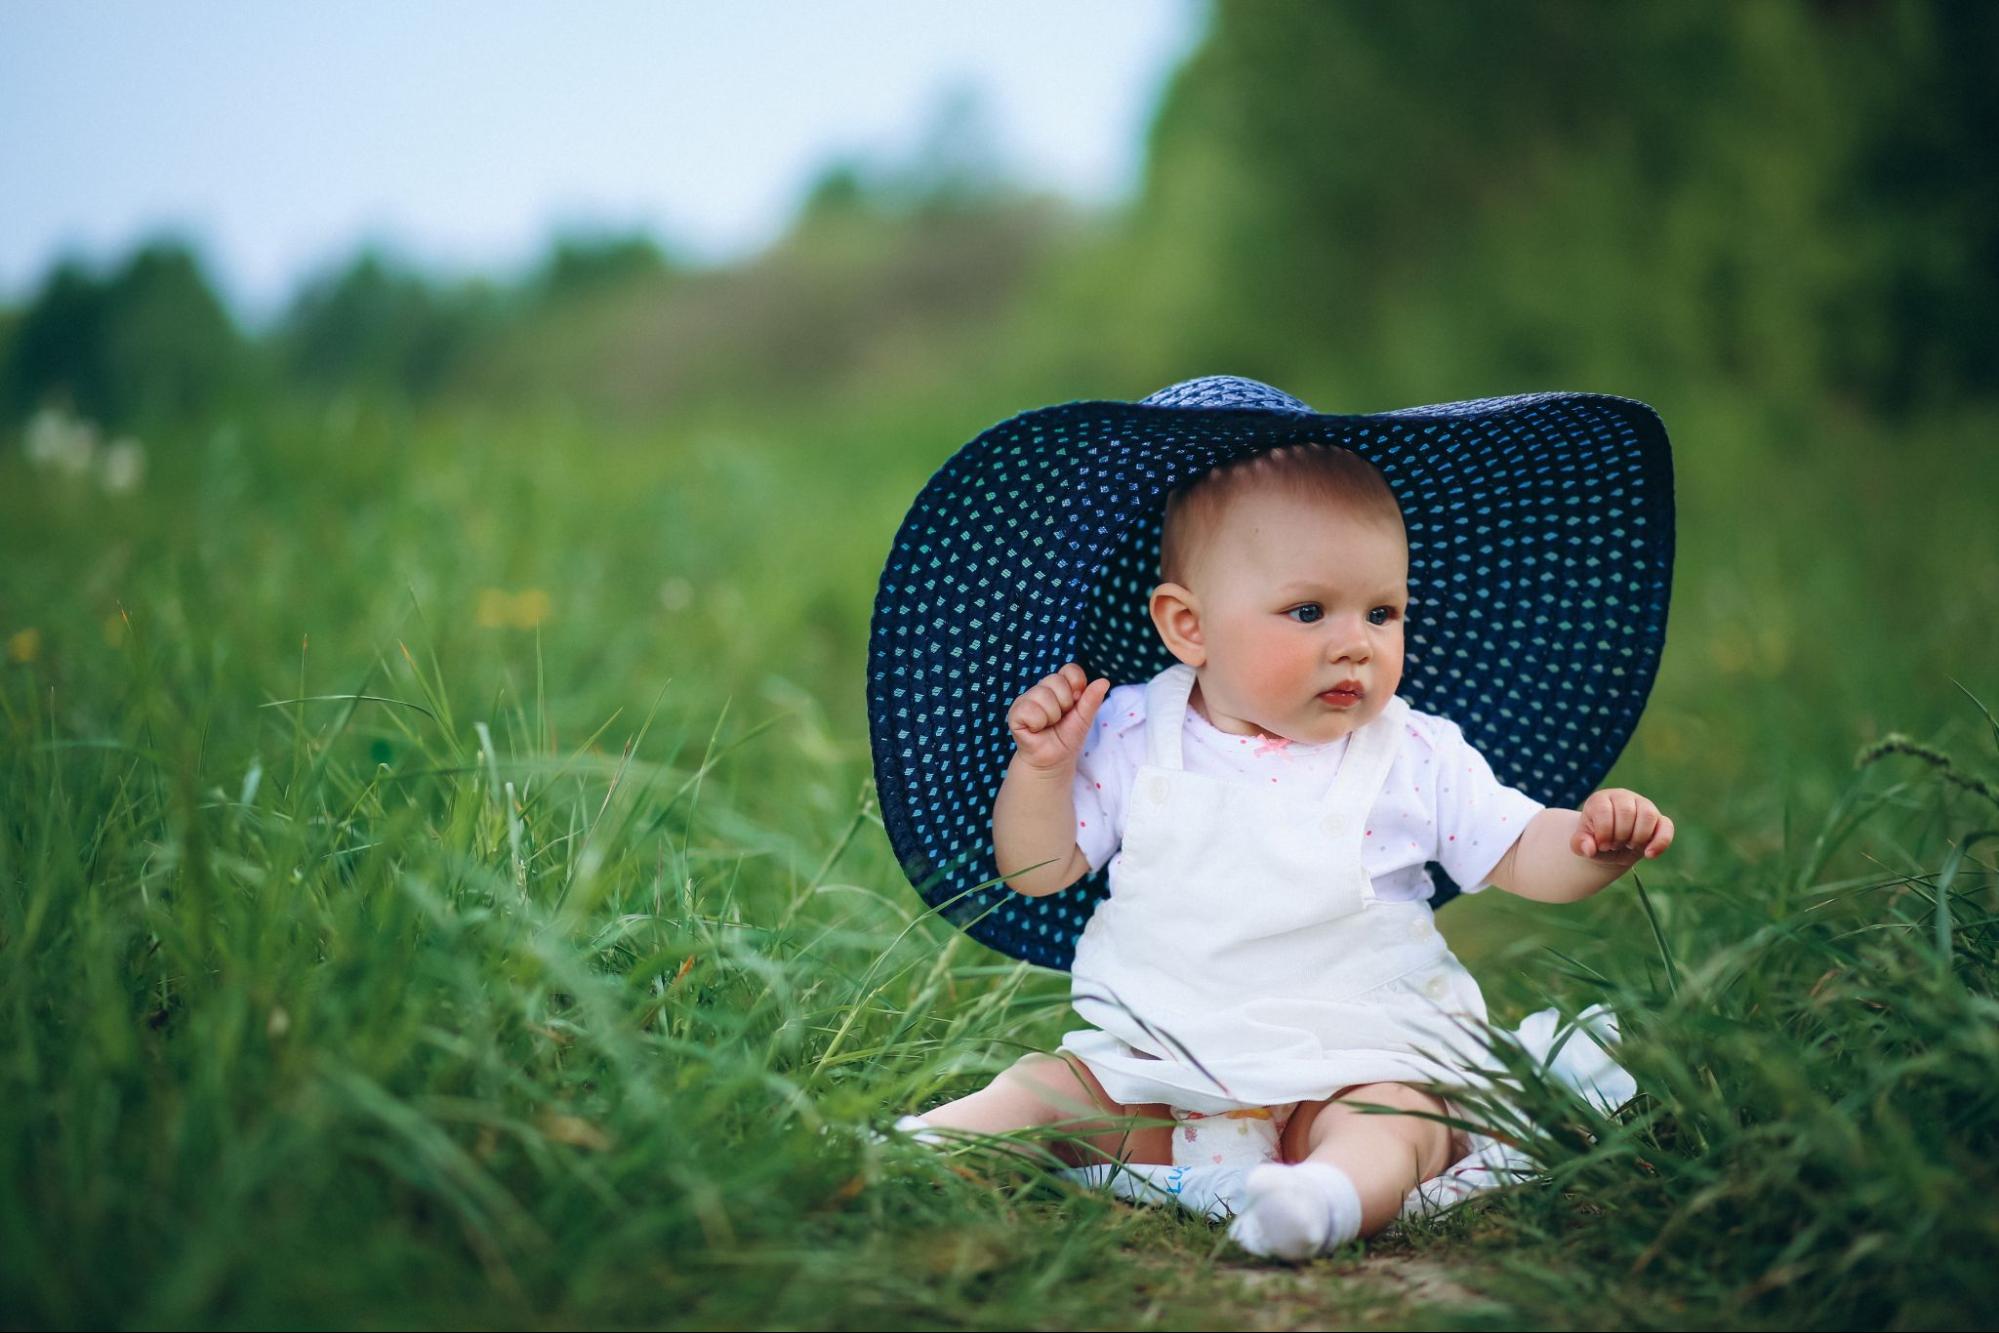 Perfect timing for baby shoot, capturing soft light and captivating moments.